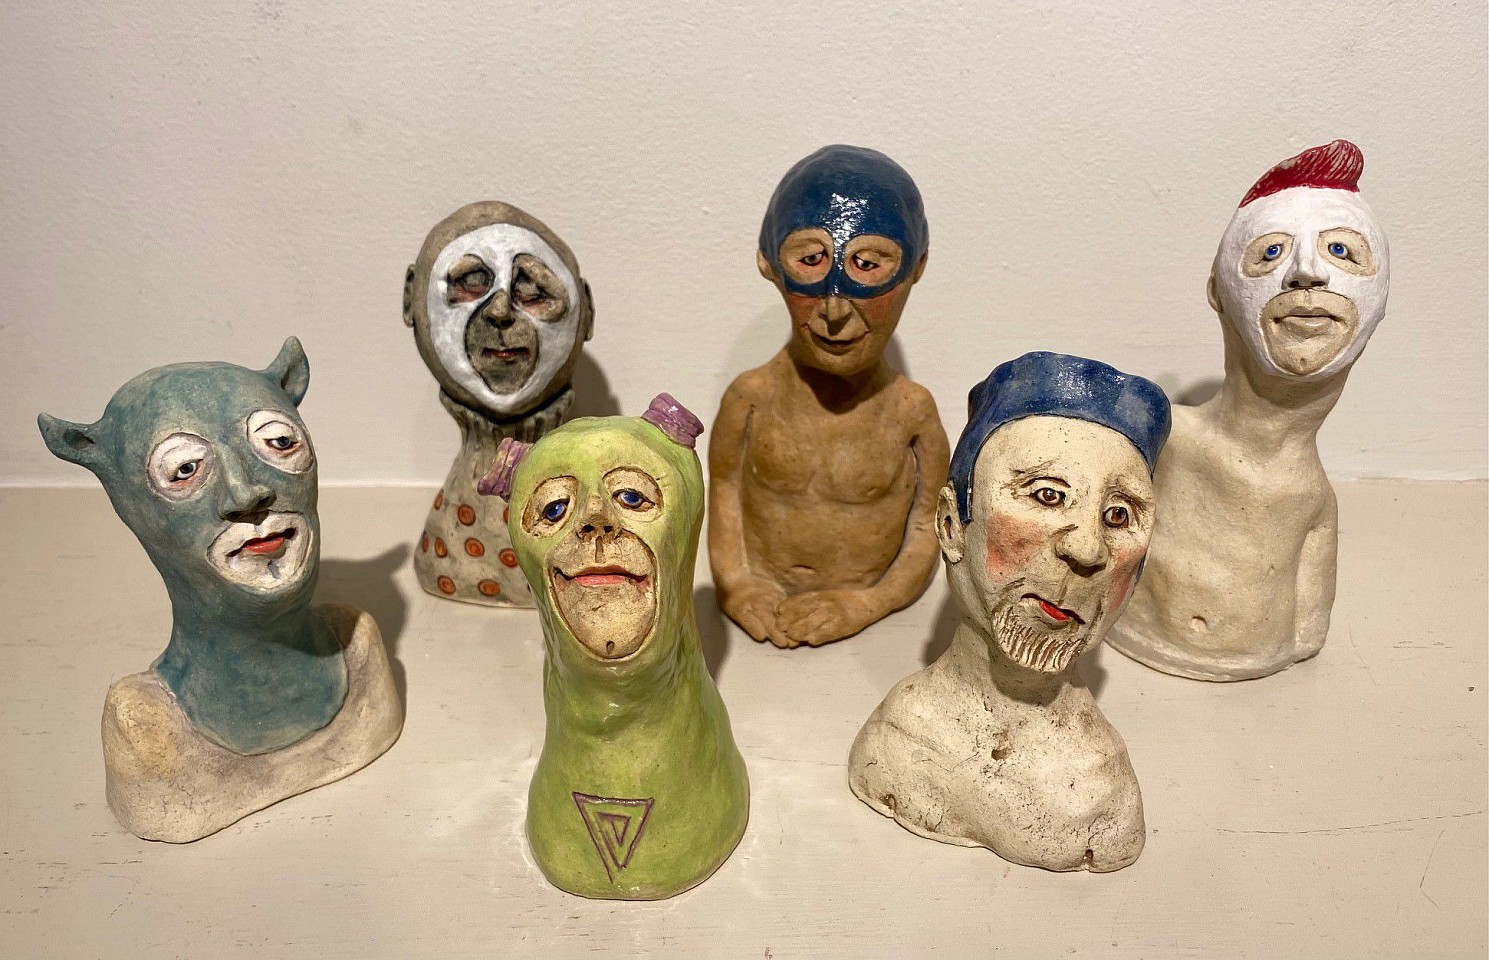 Jeanine Pennell, Characters Group 4
glazed ceramic, 4"" - 6""
JCAC 6292.04
$175